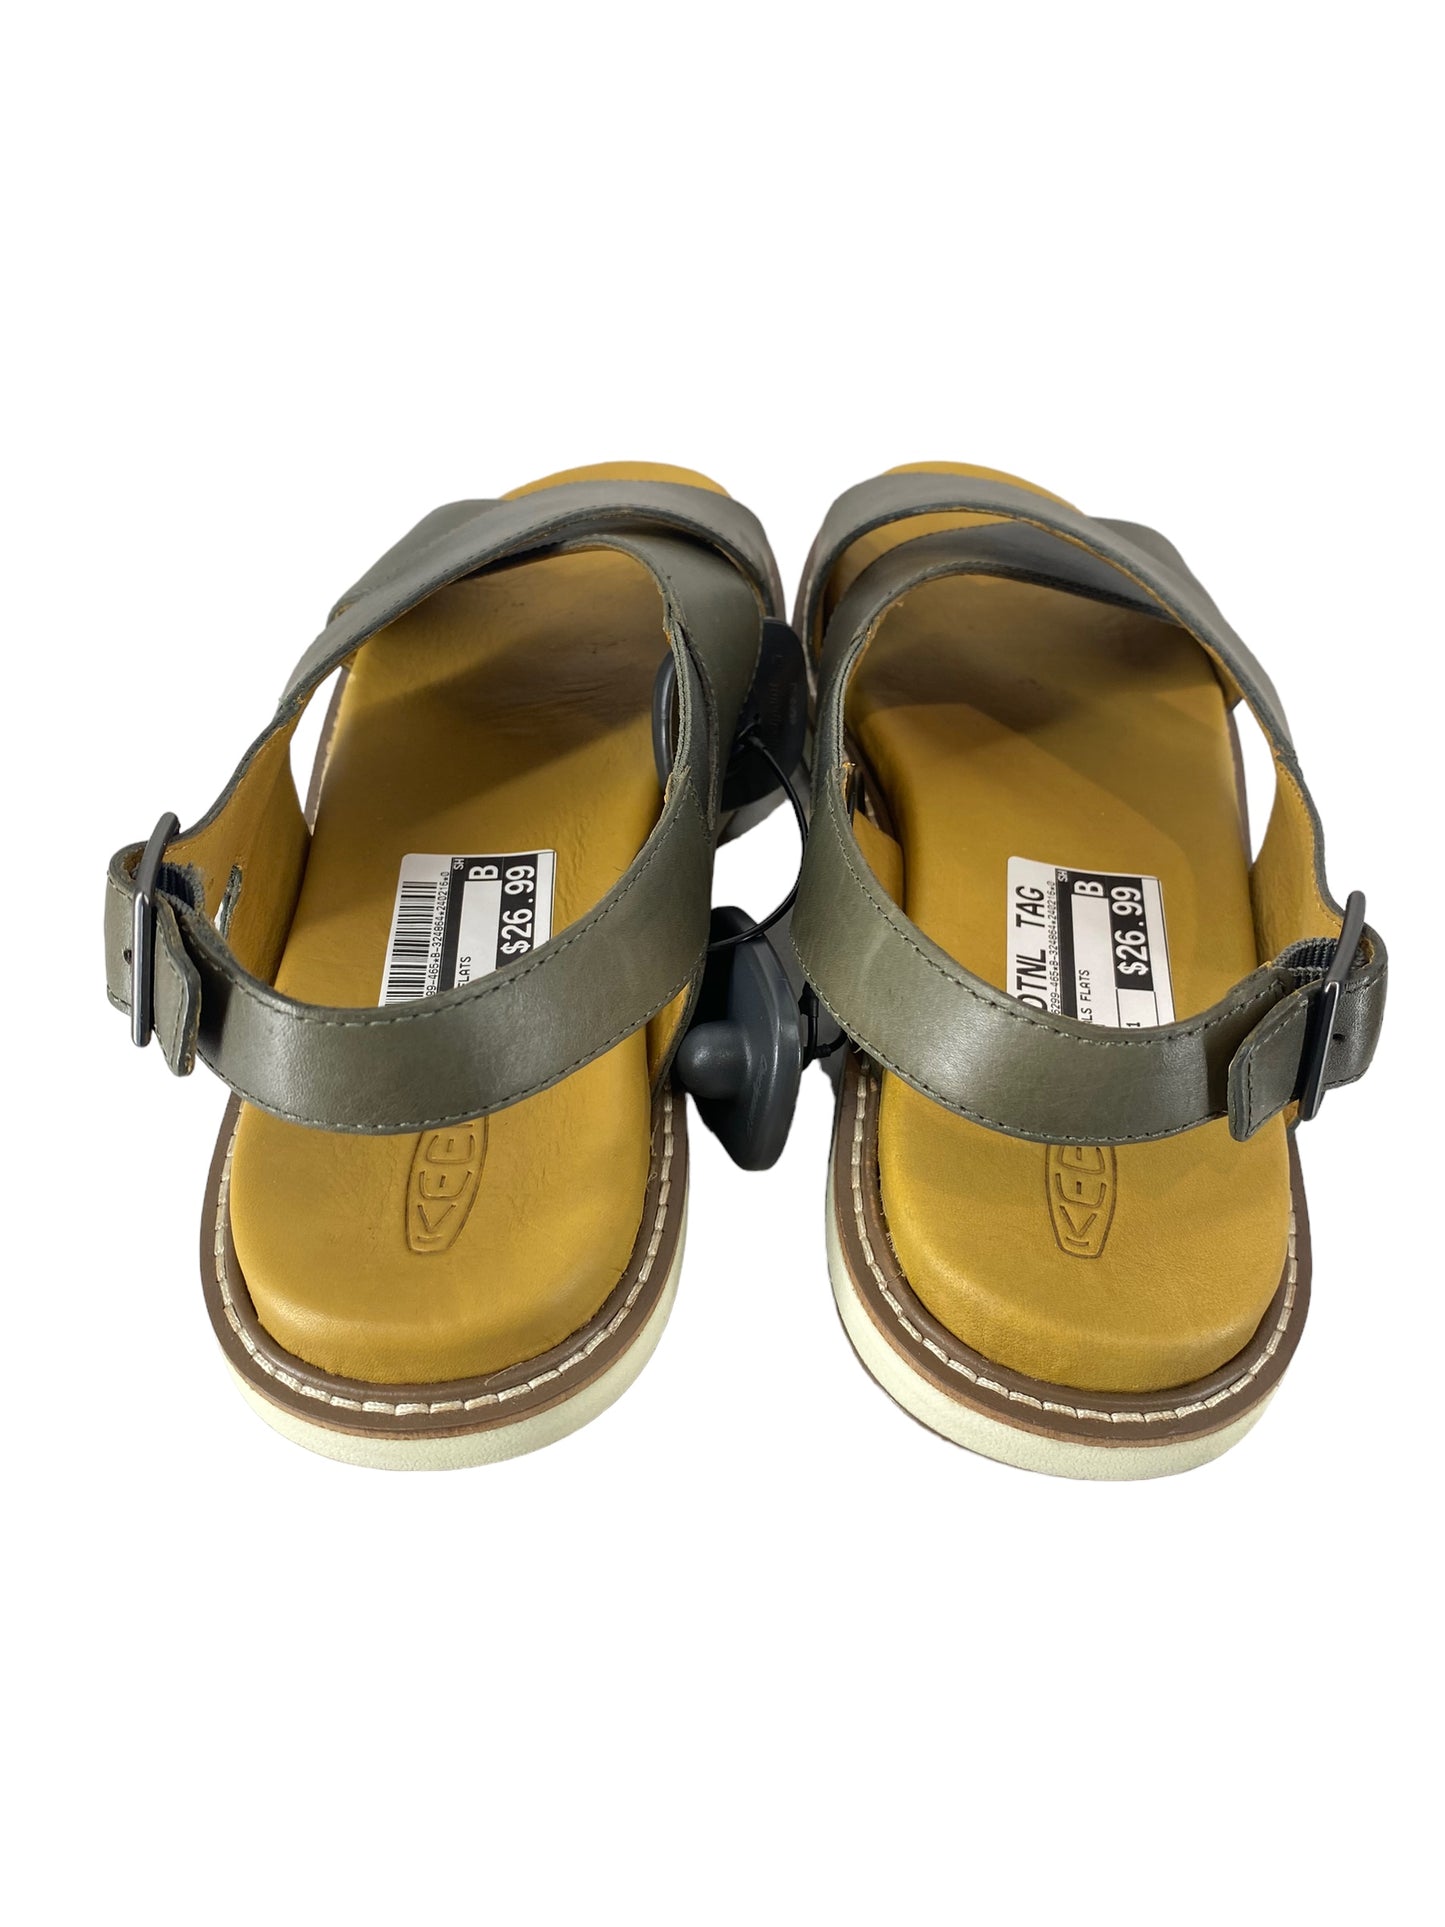 Sandals Flats By Keen  Size: 11